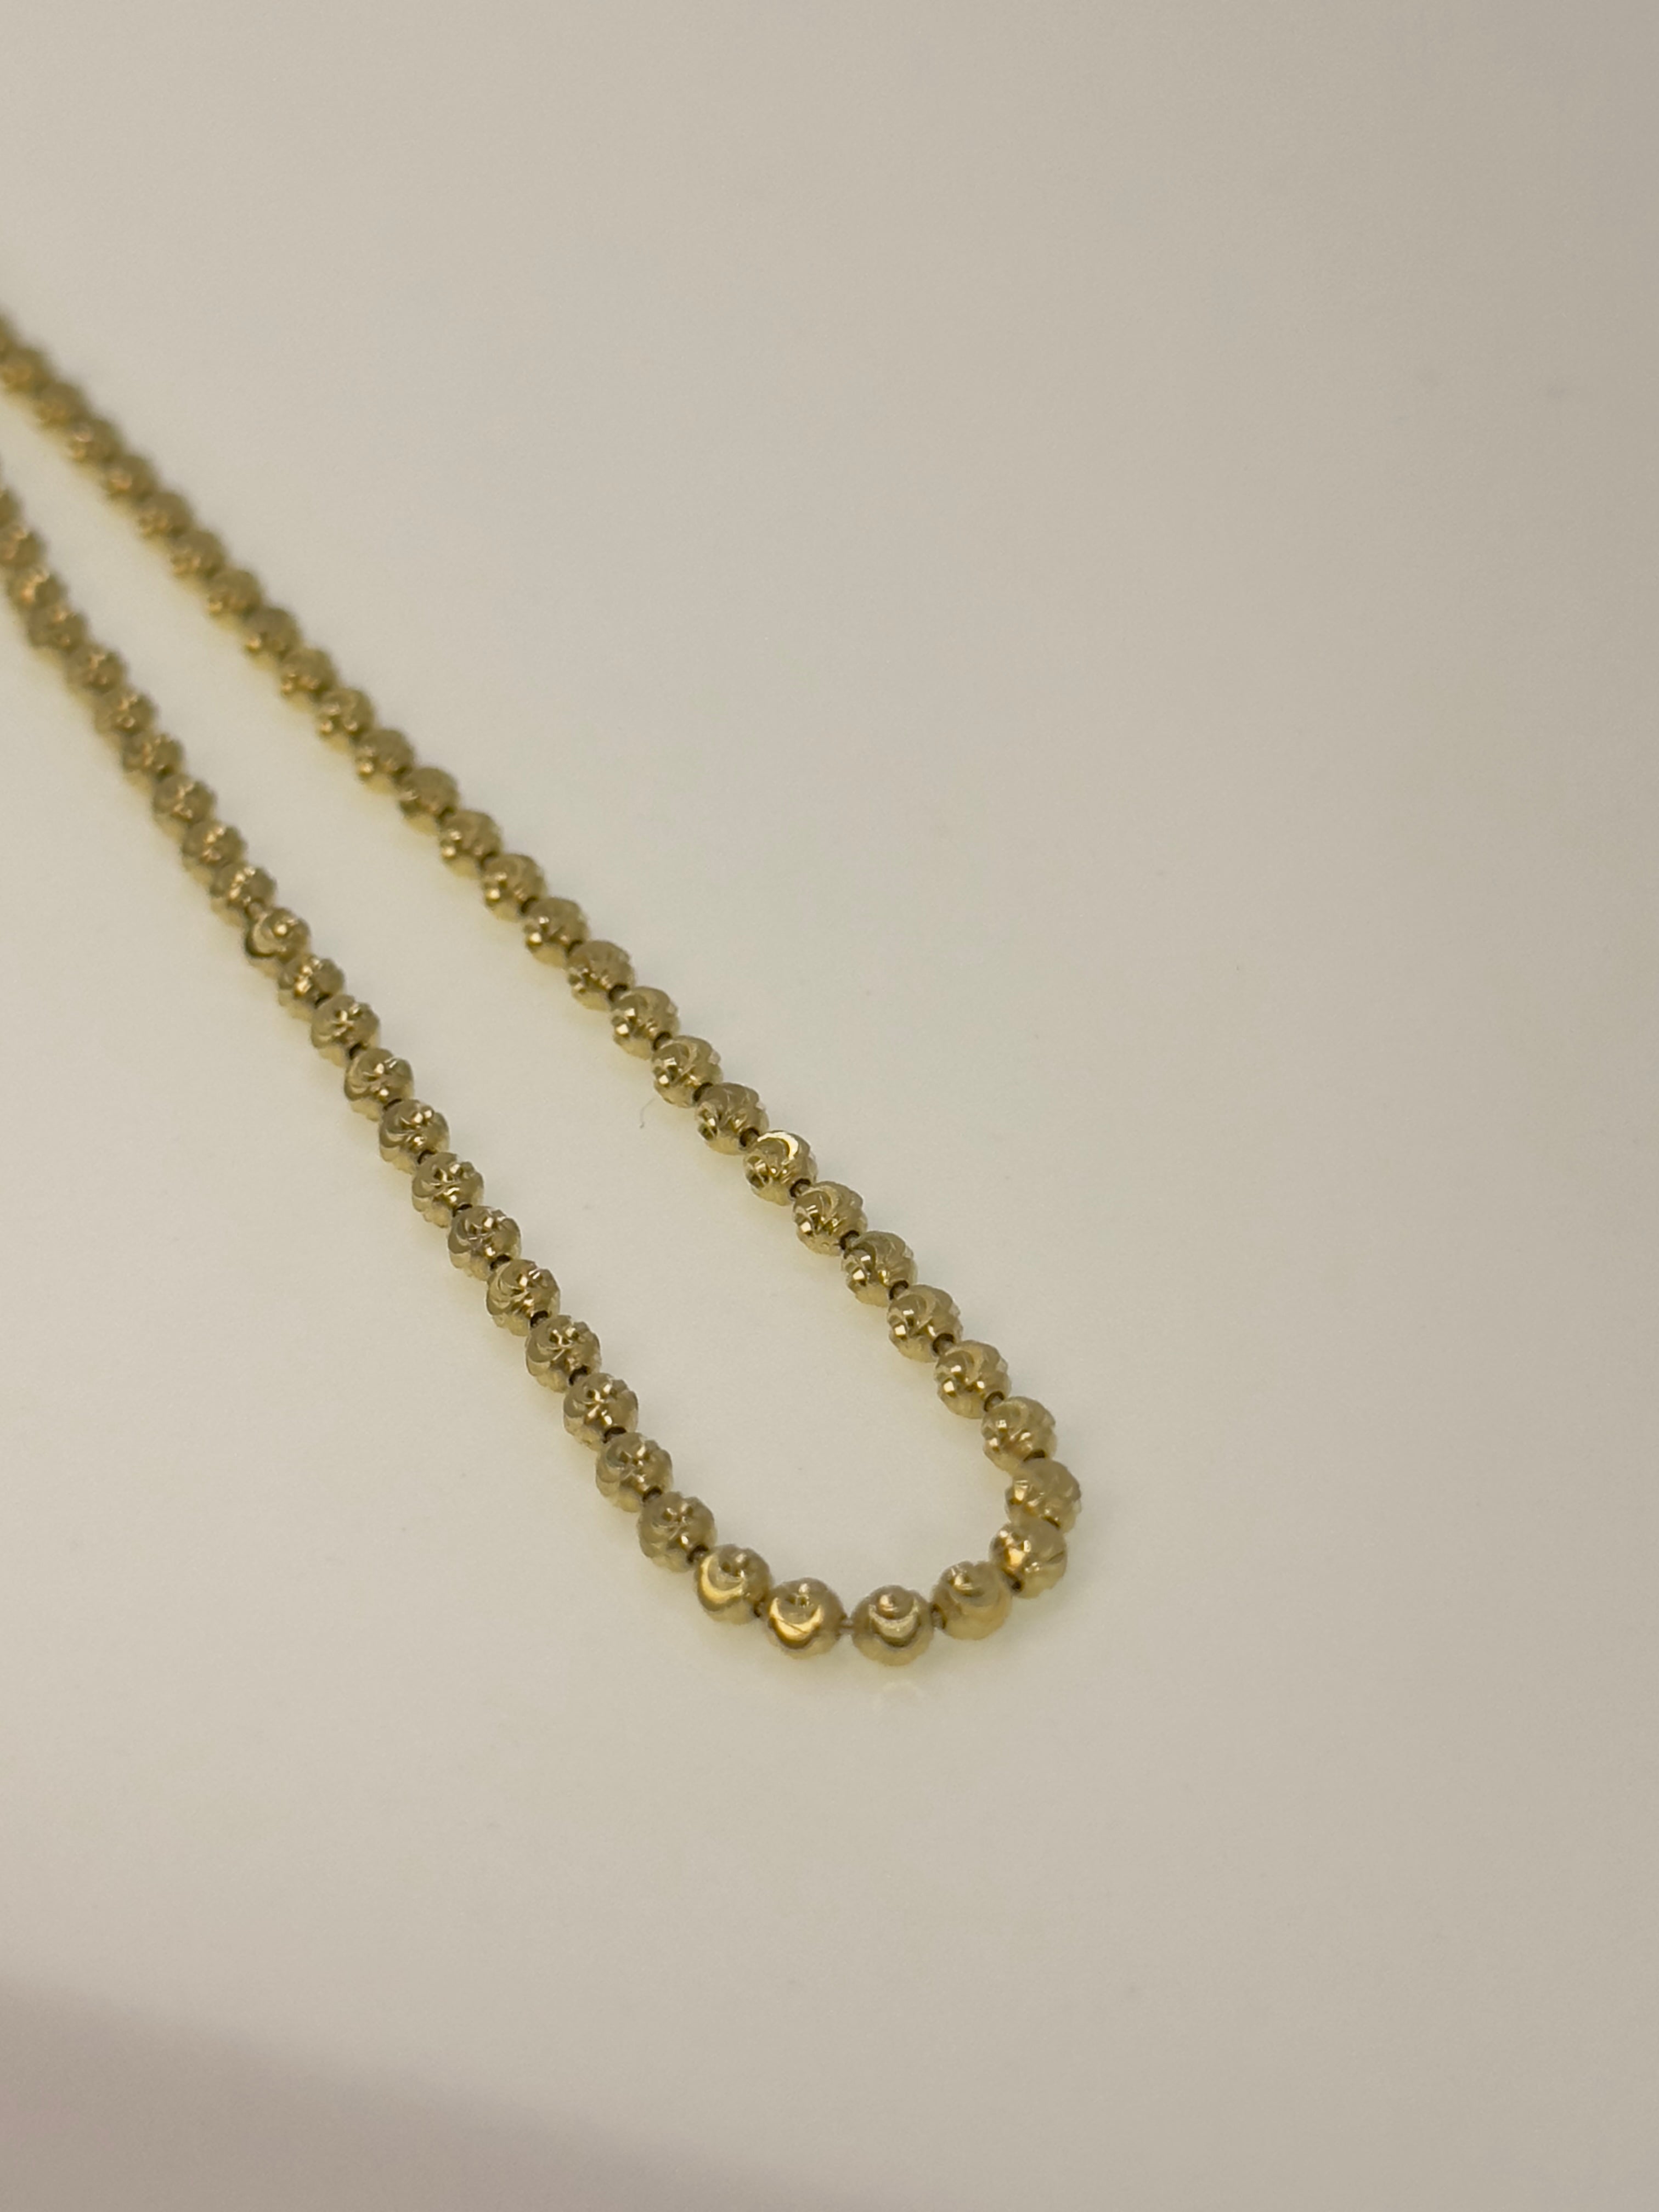 DR1679 - 925 Sterling Silver,14K YG Bonded - Men's Gold Chains - Moon Cut